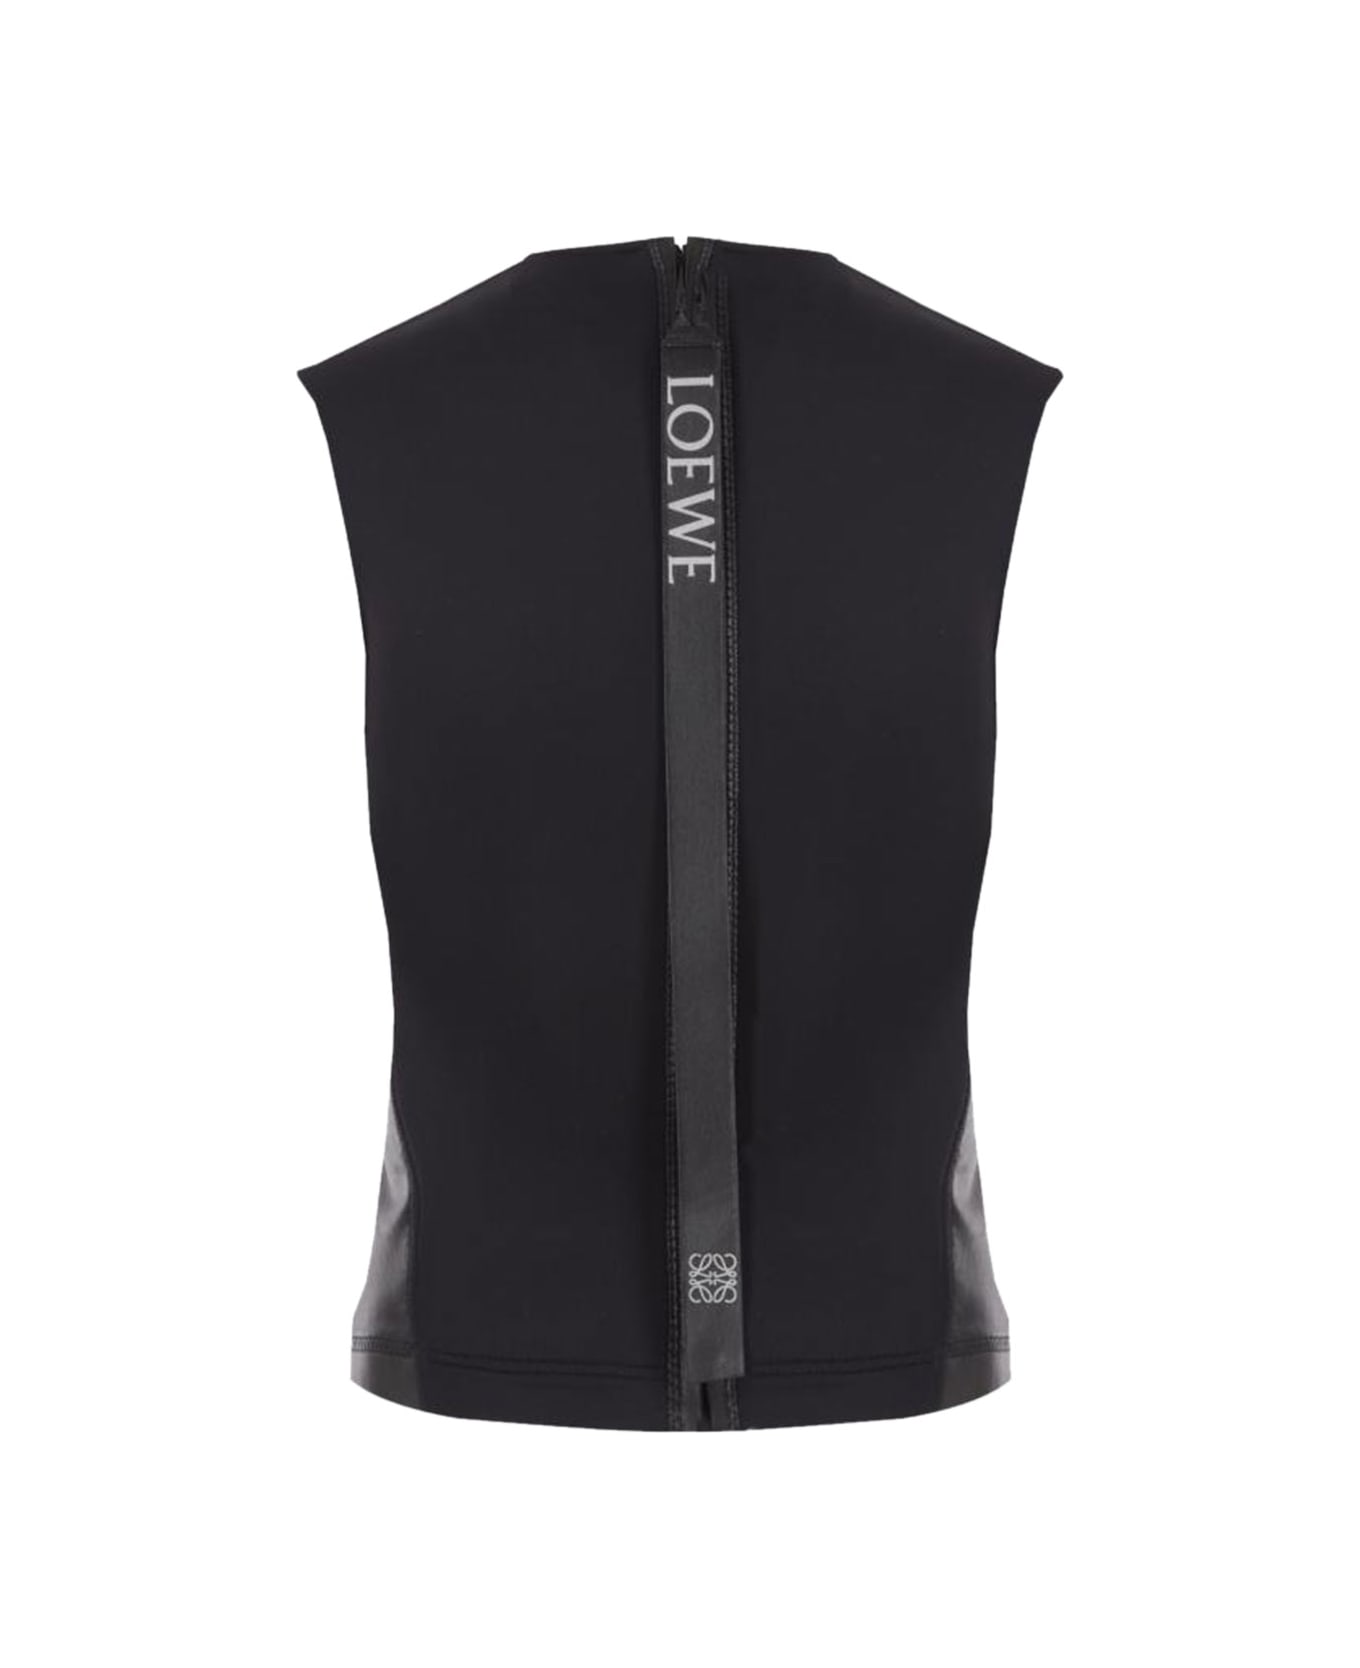 Loewe Stretch Leather And Technical Fabric Sleeveless Top - BLACK ジャケット